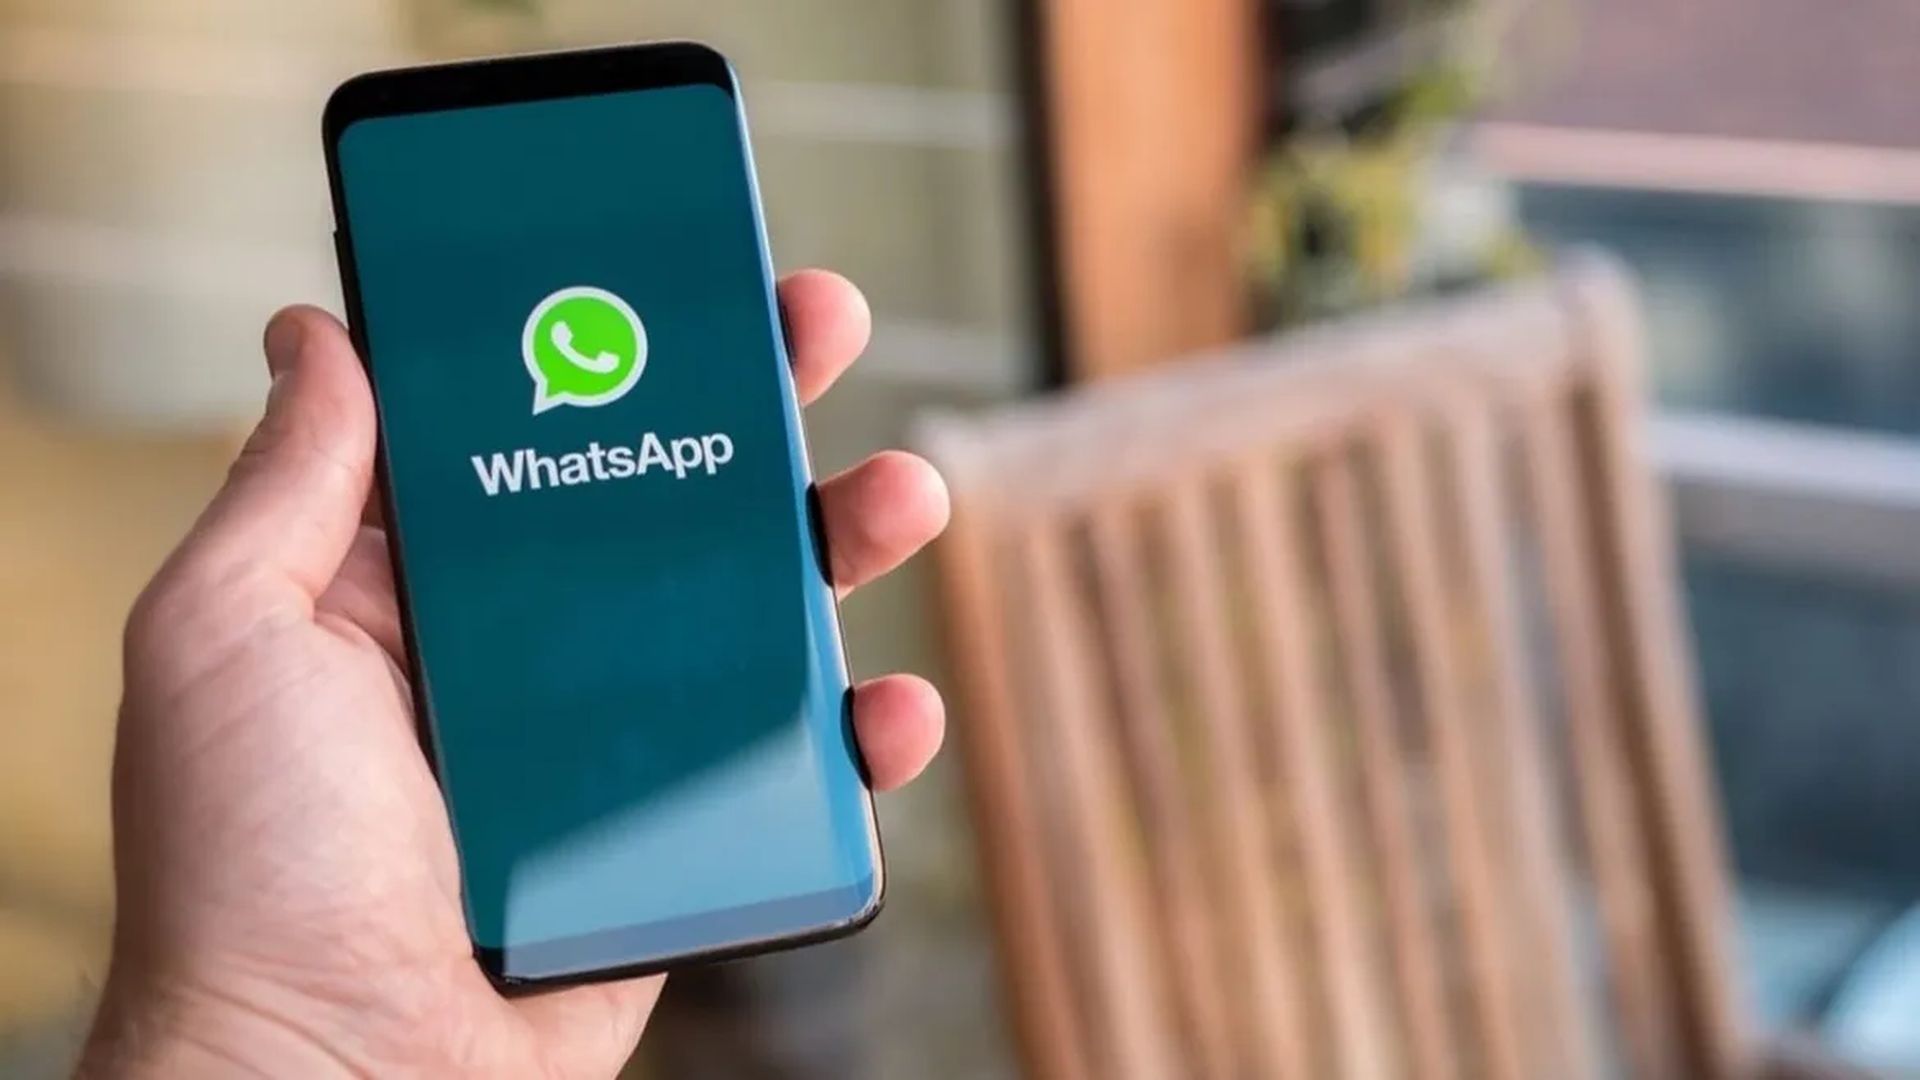 WhatsApp privacy update: New features are rolling out